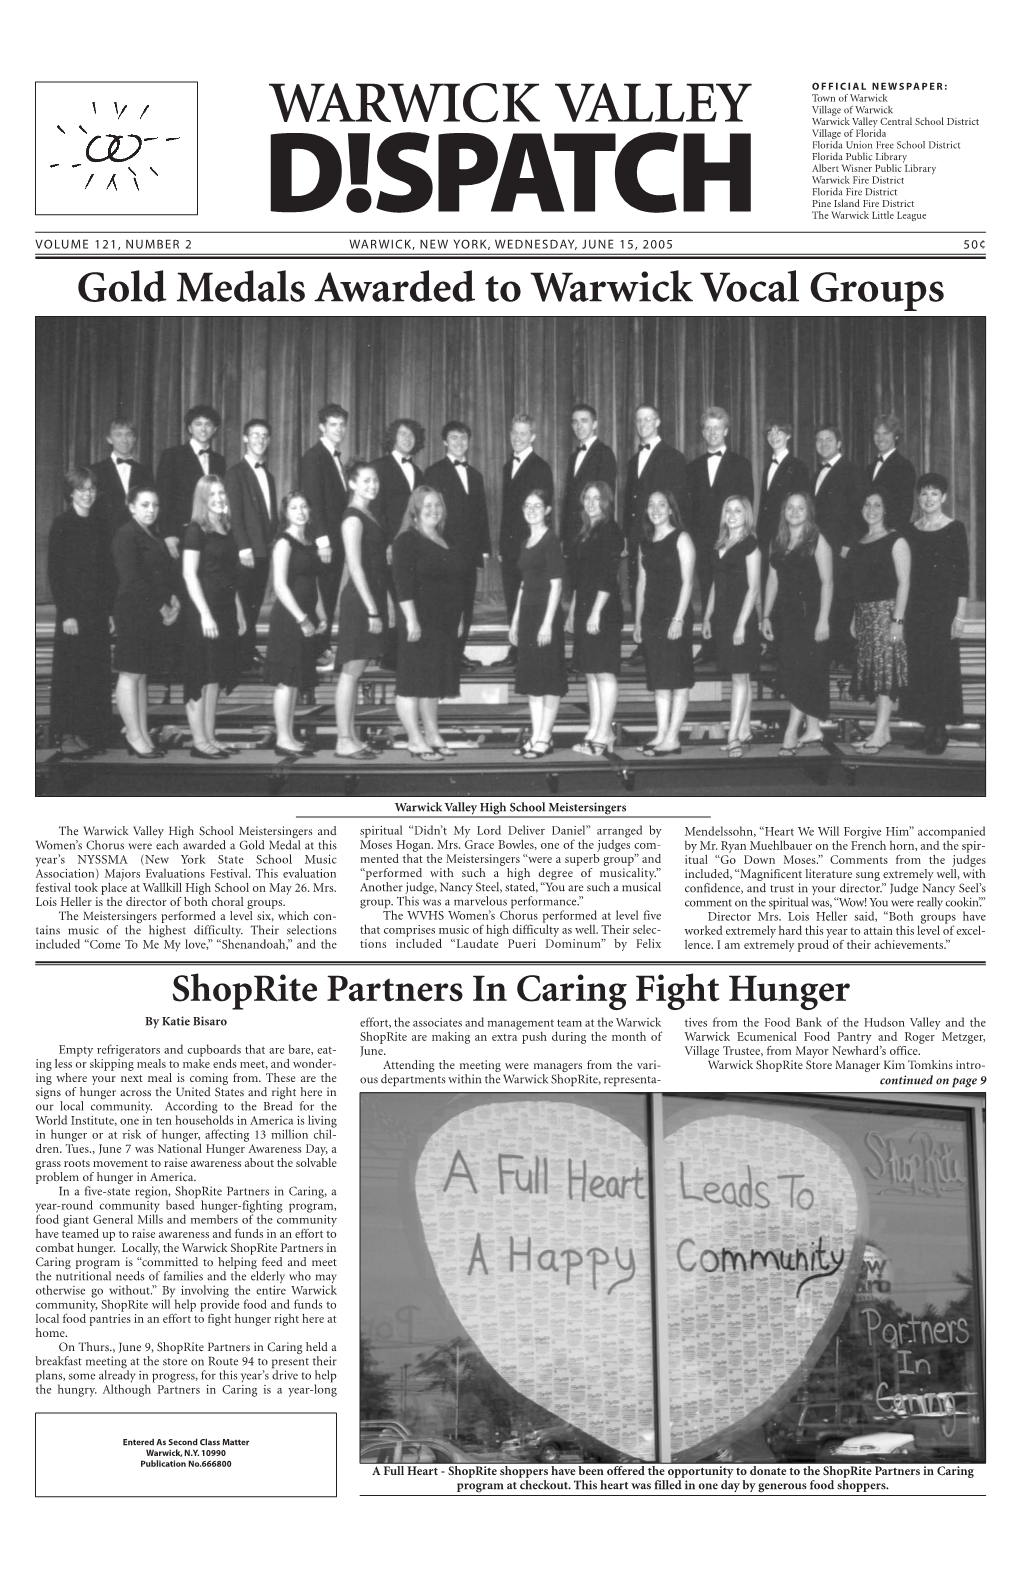 Gold Medals Awarded to Warwick Vocal Groups